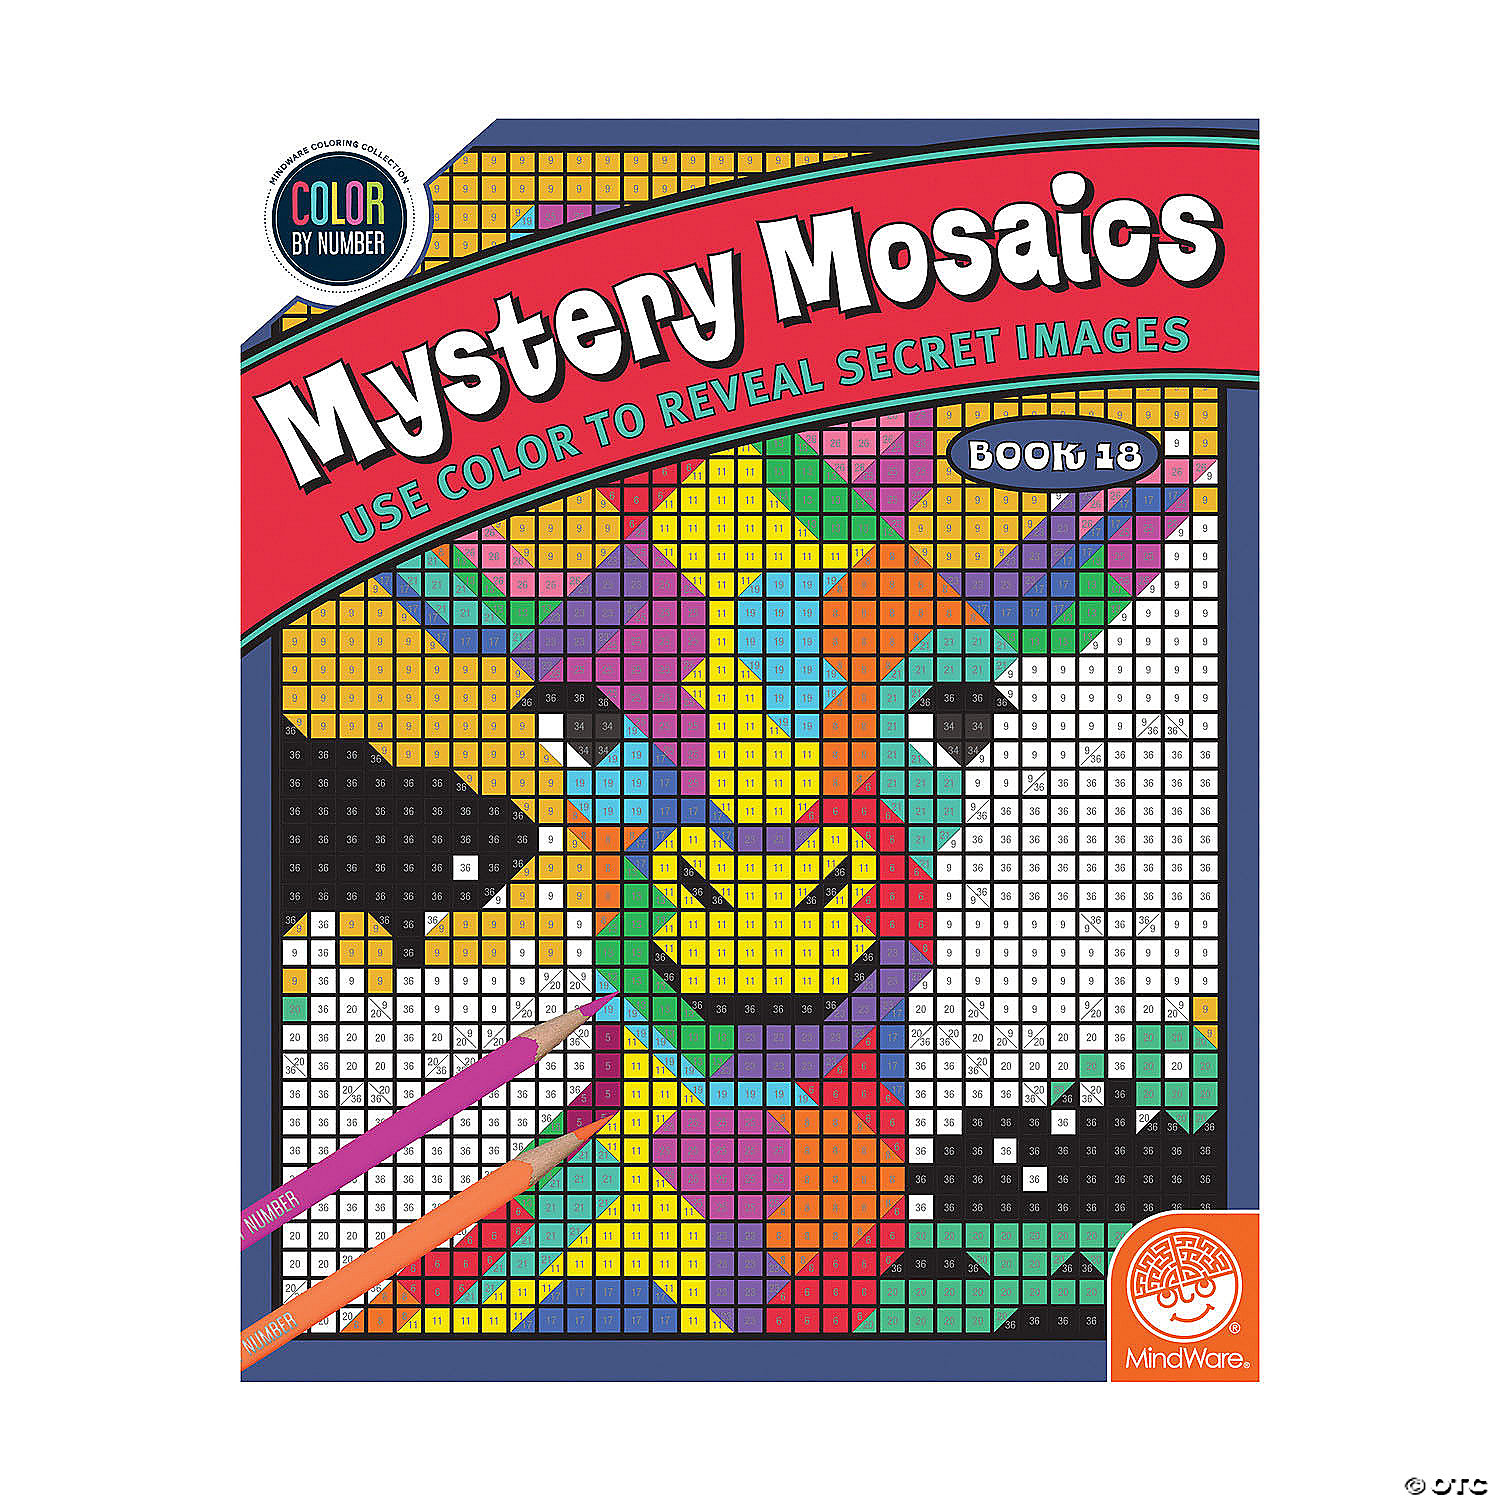 18 Unique Puzzles With Up To 12 Color Directions Teaches Creativity and Fosters Imagination Includes 10” x 17” Fold-Out Designs MindWare Mystery Mosaics